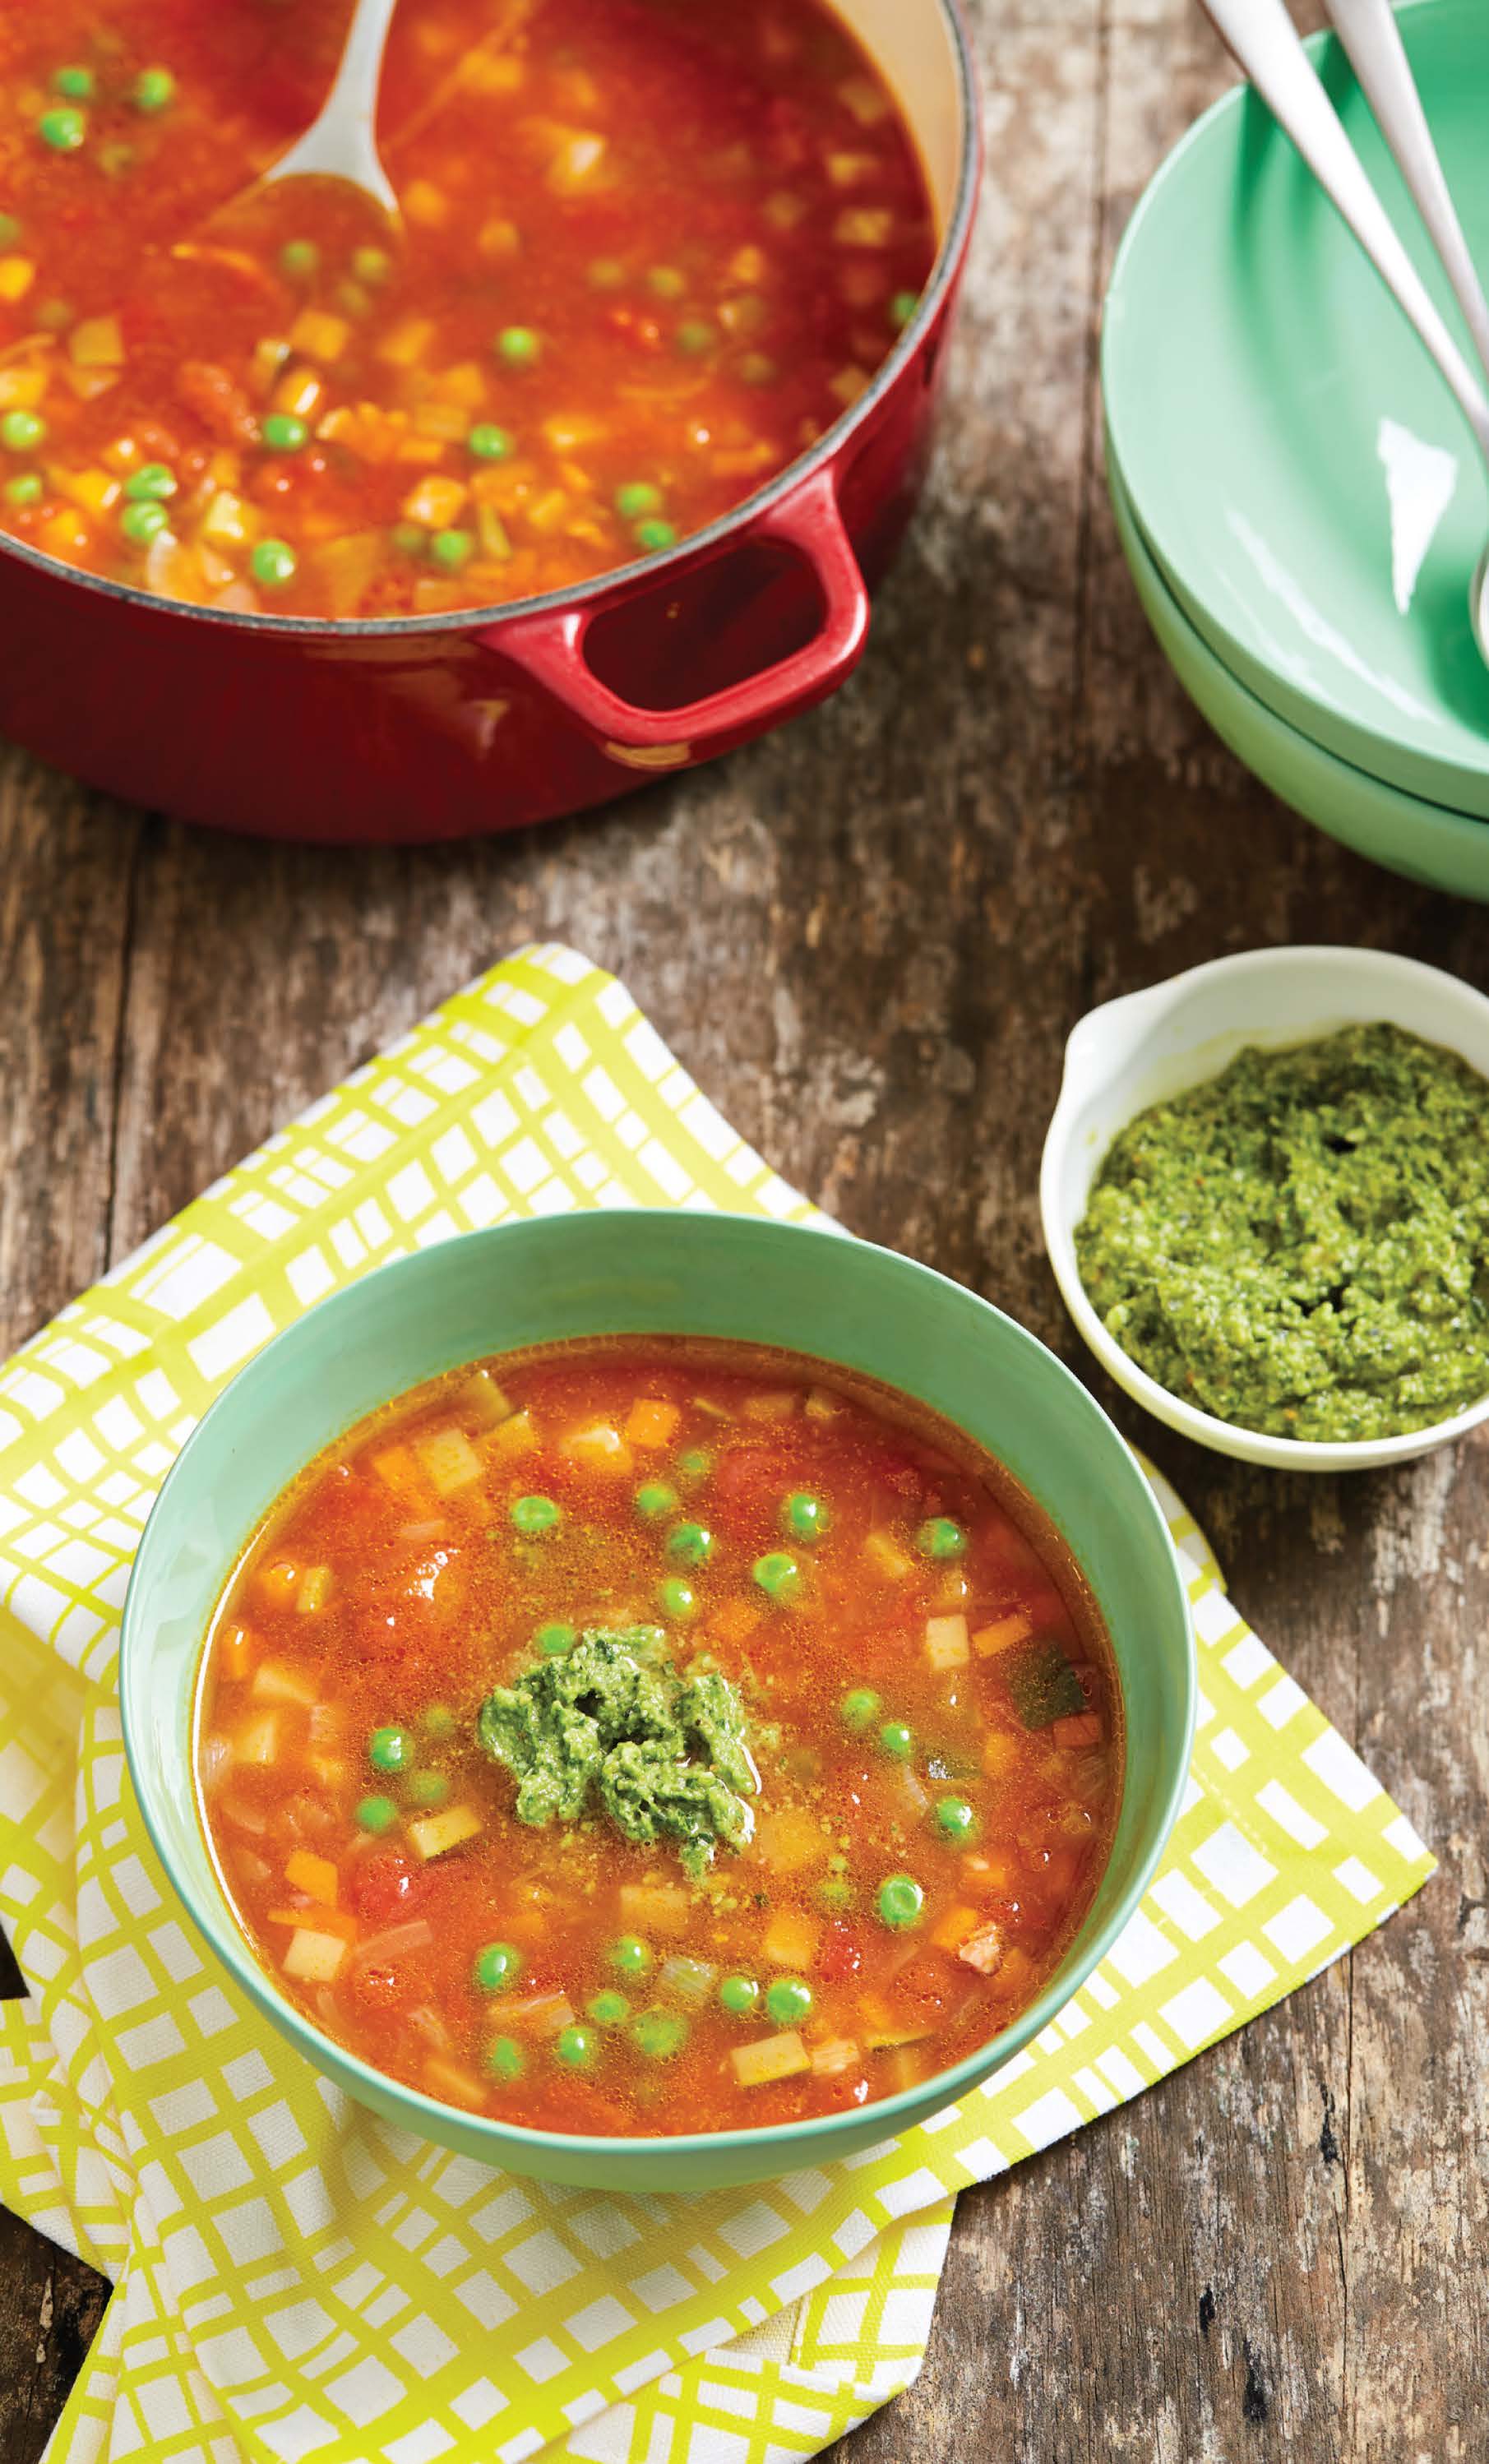 Warming vegetable and bean soup with pesto